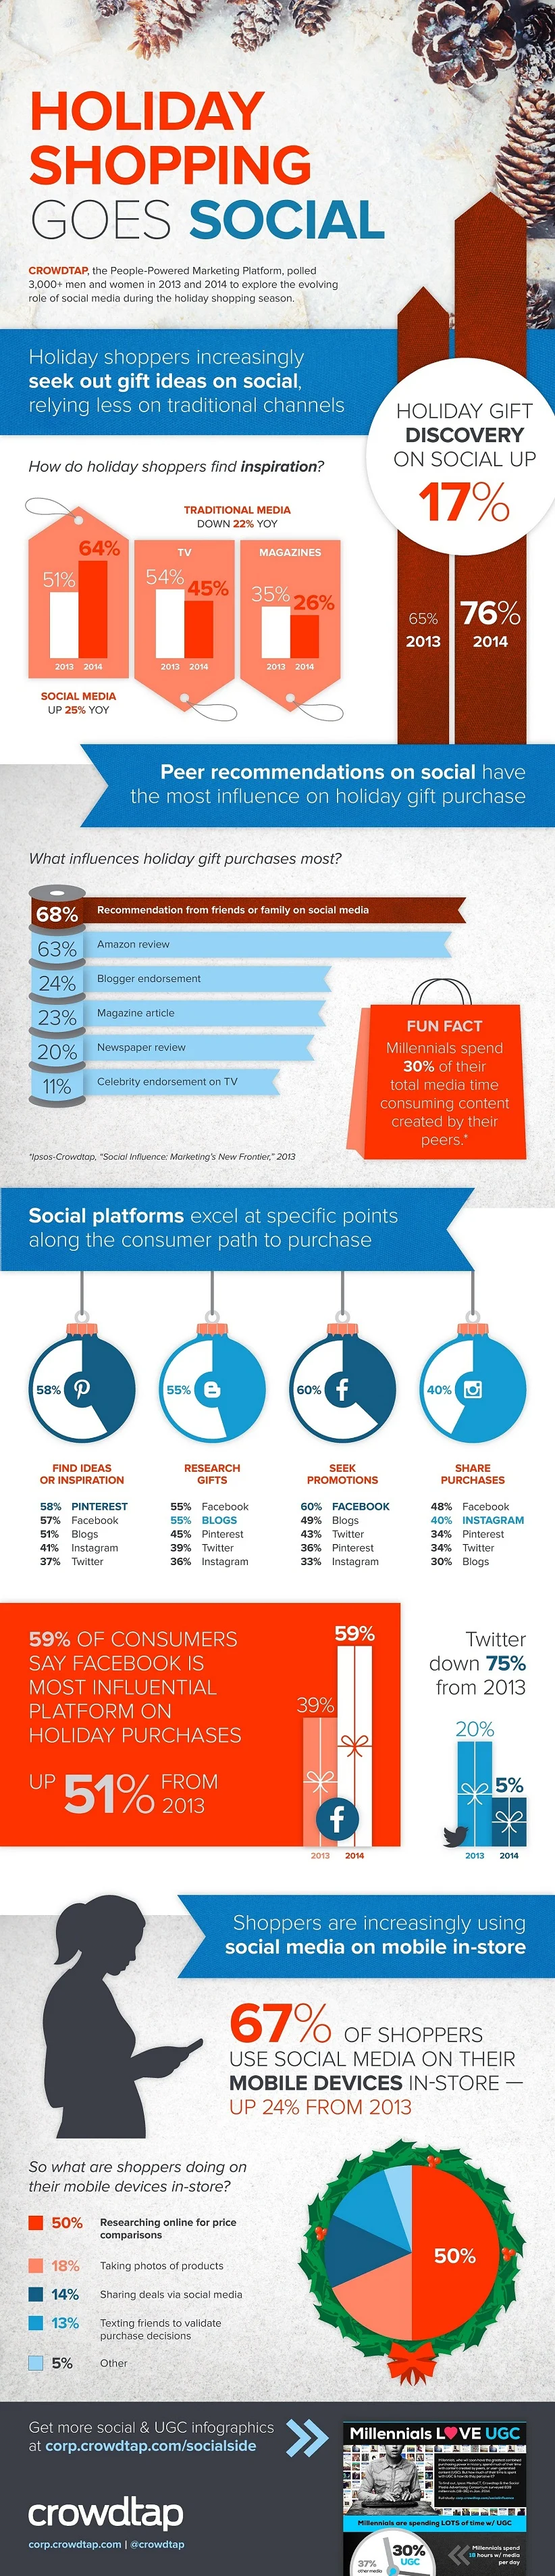 Facebook, Twitter, Instagram, and Pinterest: Holiday Shopping Goes Social - #Infographic #Socialmedia